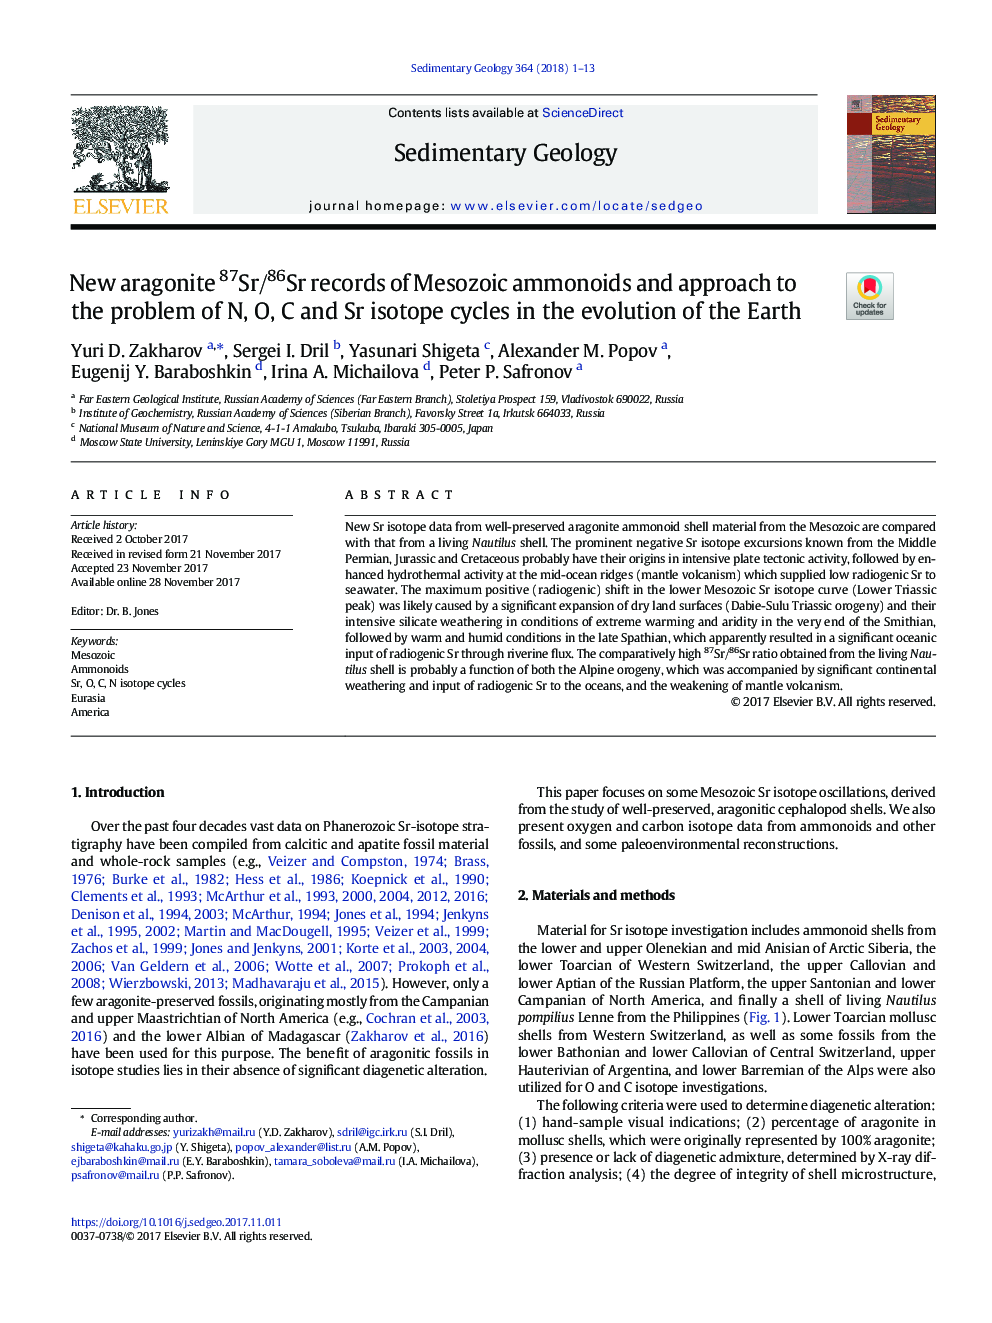 New aragonite 87Sr/86Sr records of Mesozoic ammonoids and approach to the problem of N, O, C and Sr isotope cycles in the evolution of the Earth